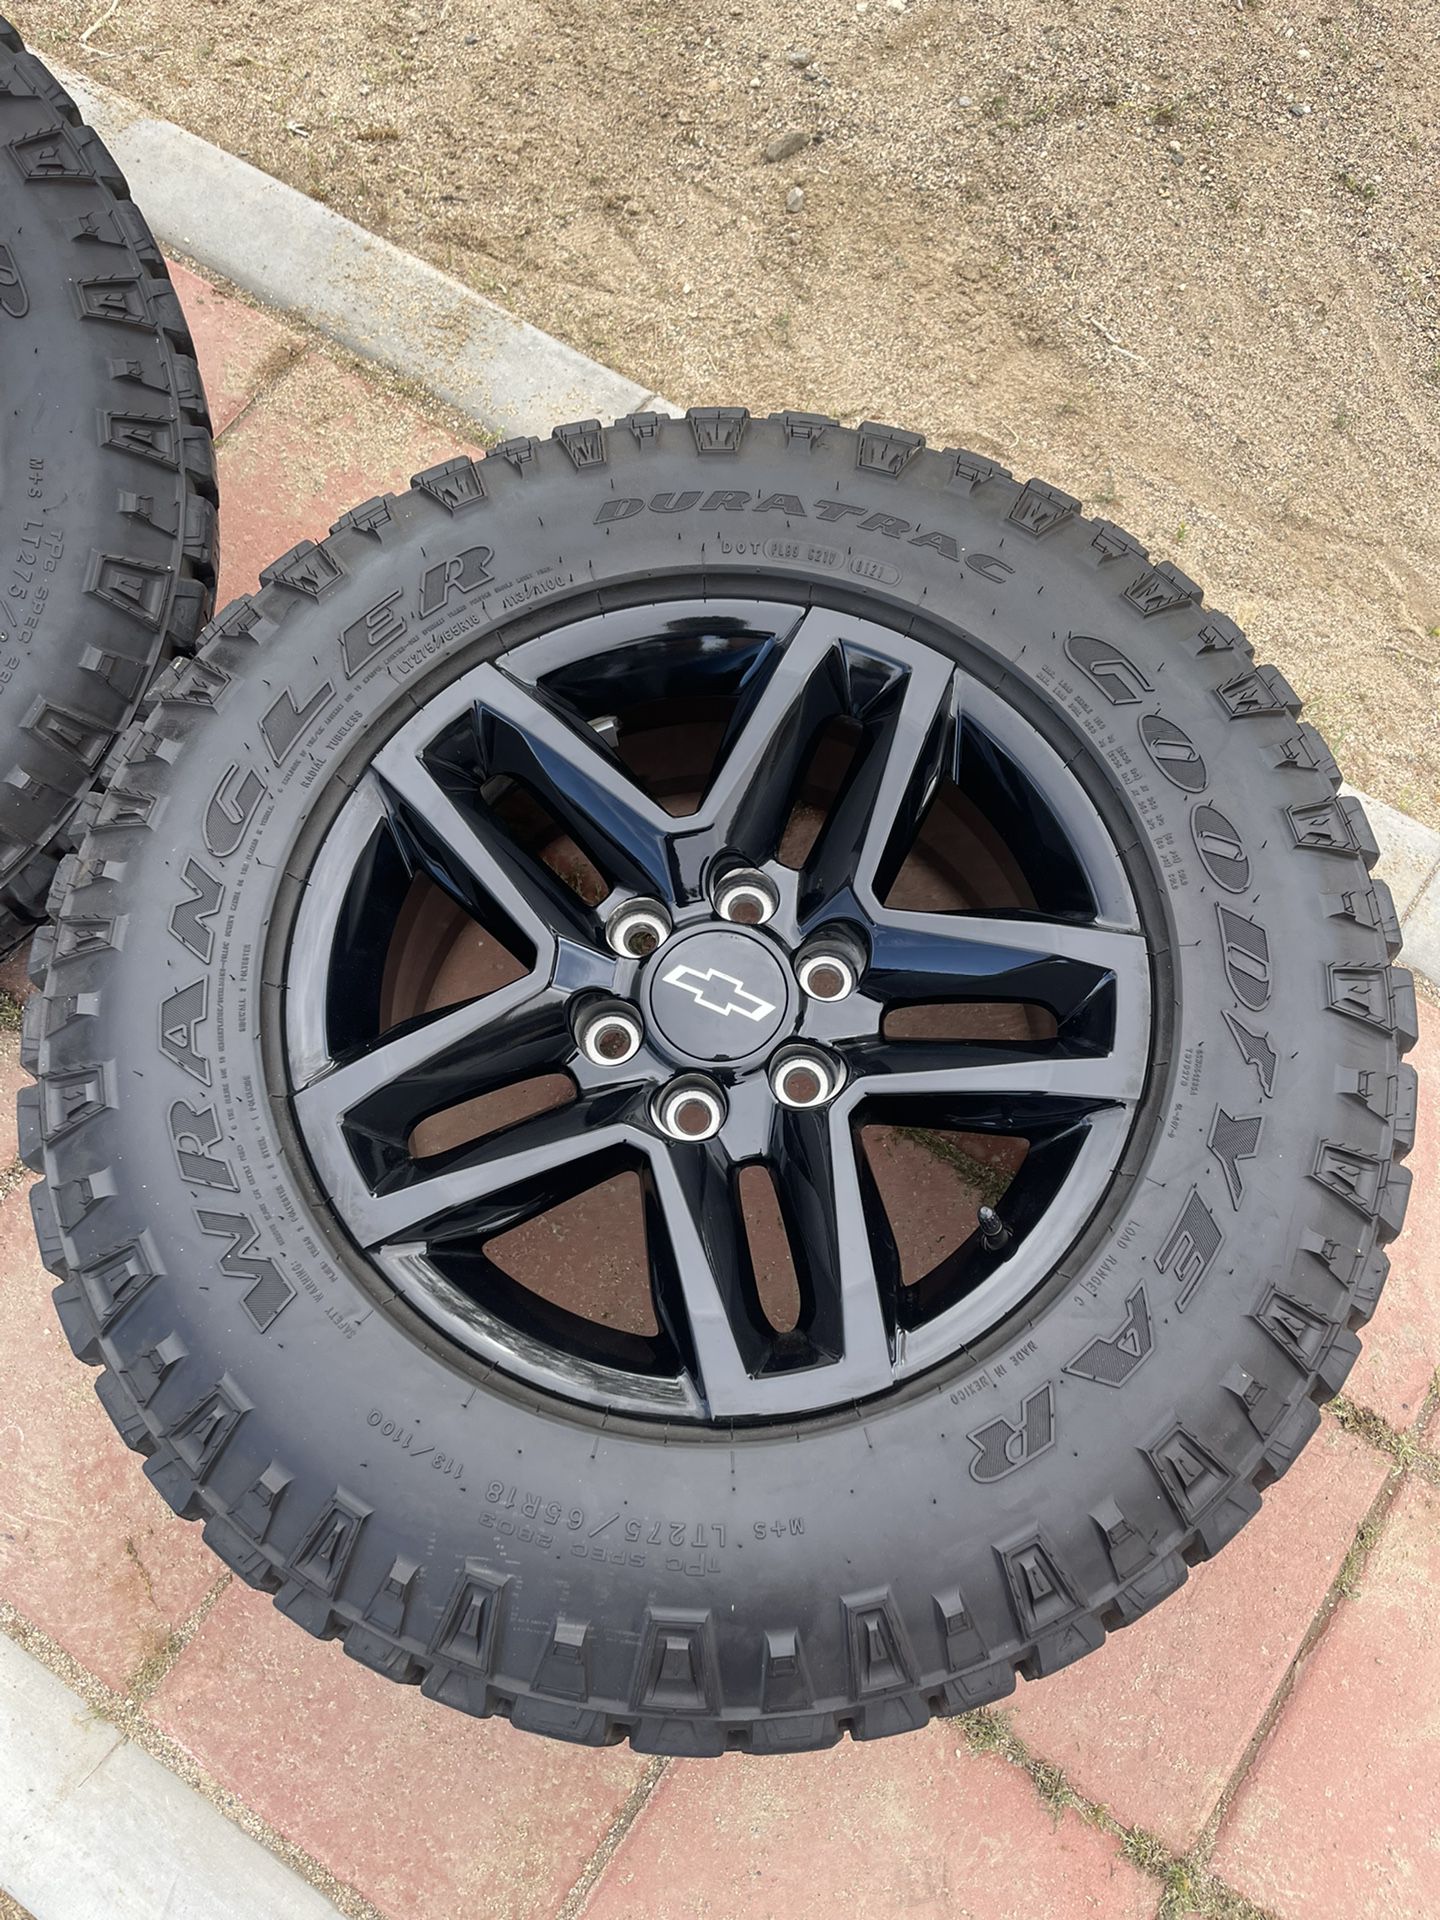 2021 Chevy Trailboss 18 Inch Gloss Black ChevyRims With 33 Inch Goodyear  Wrangler Duratrac Tires for Sale in Victorville, CA - OfferUp